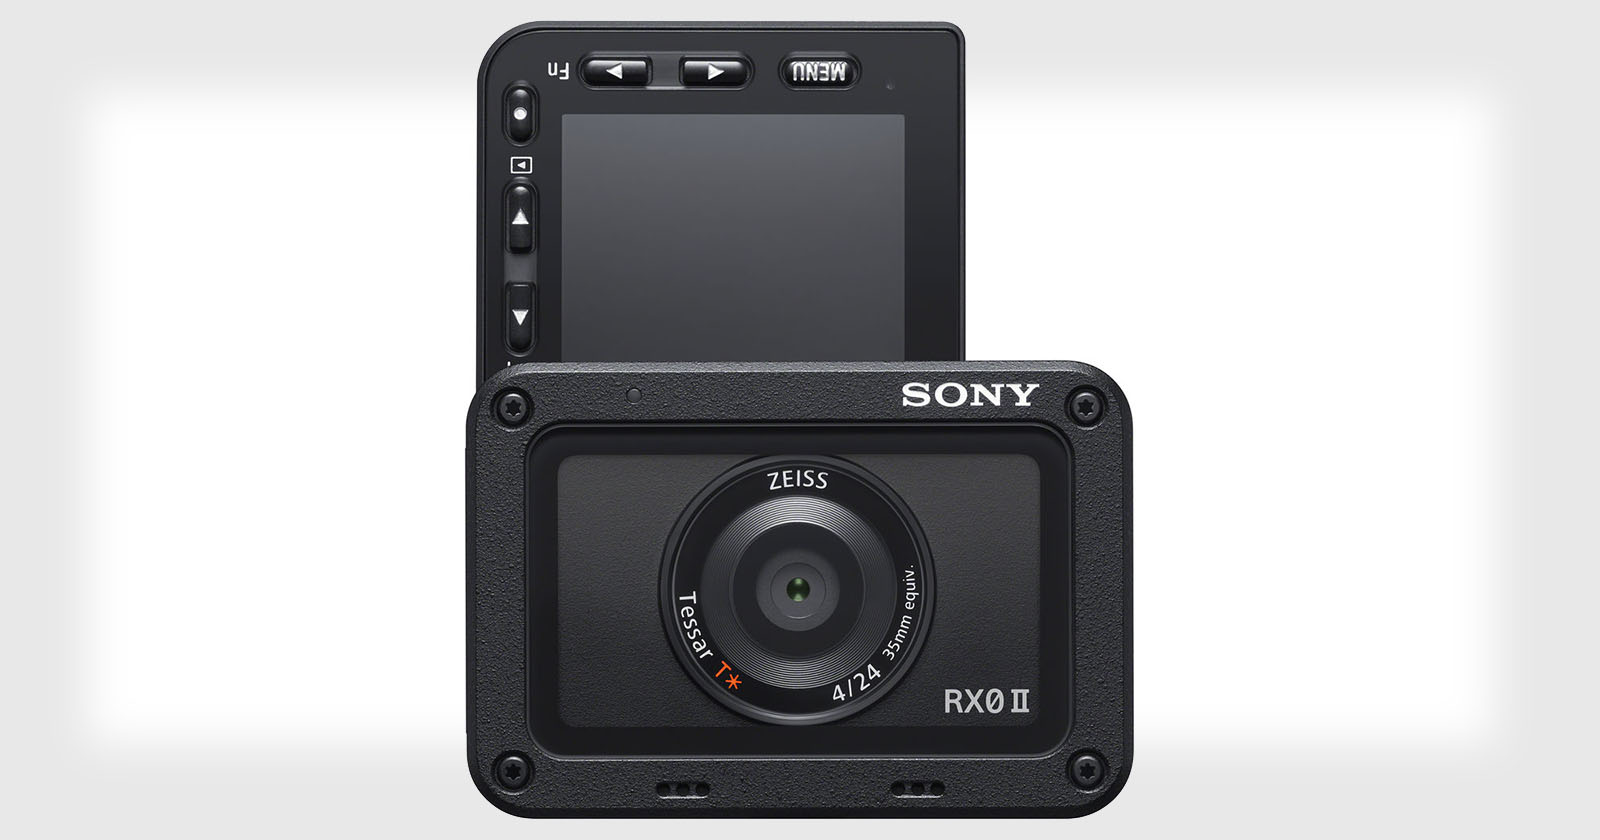 Sony RX0 II Action Camera Adds Internal 4K and a Tilting LCD 